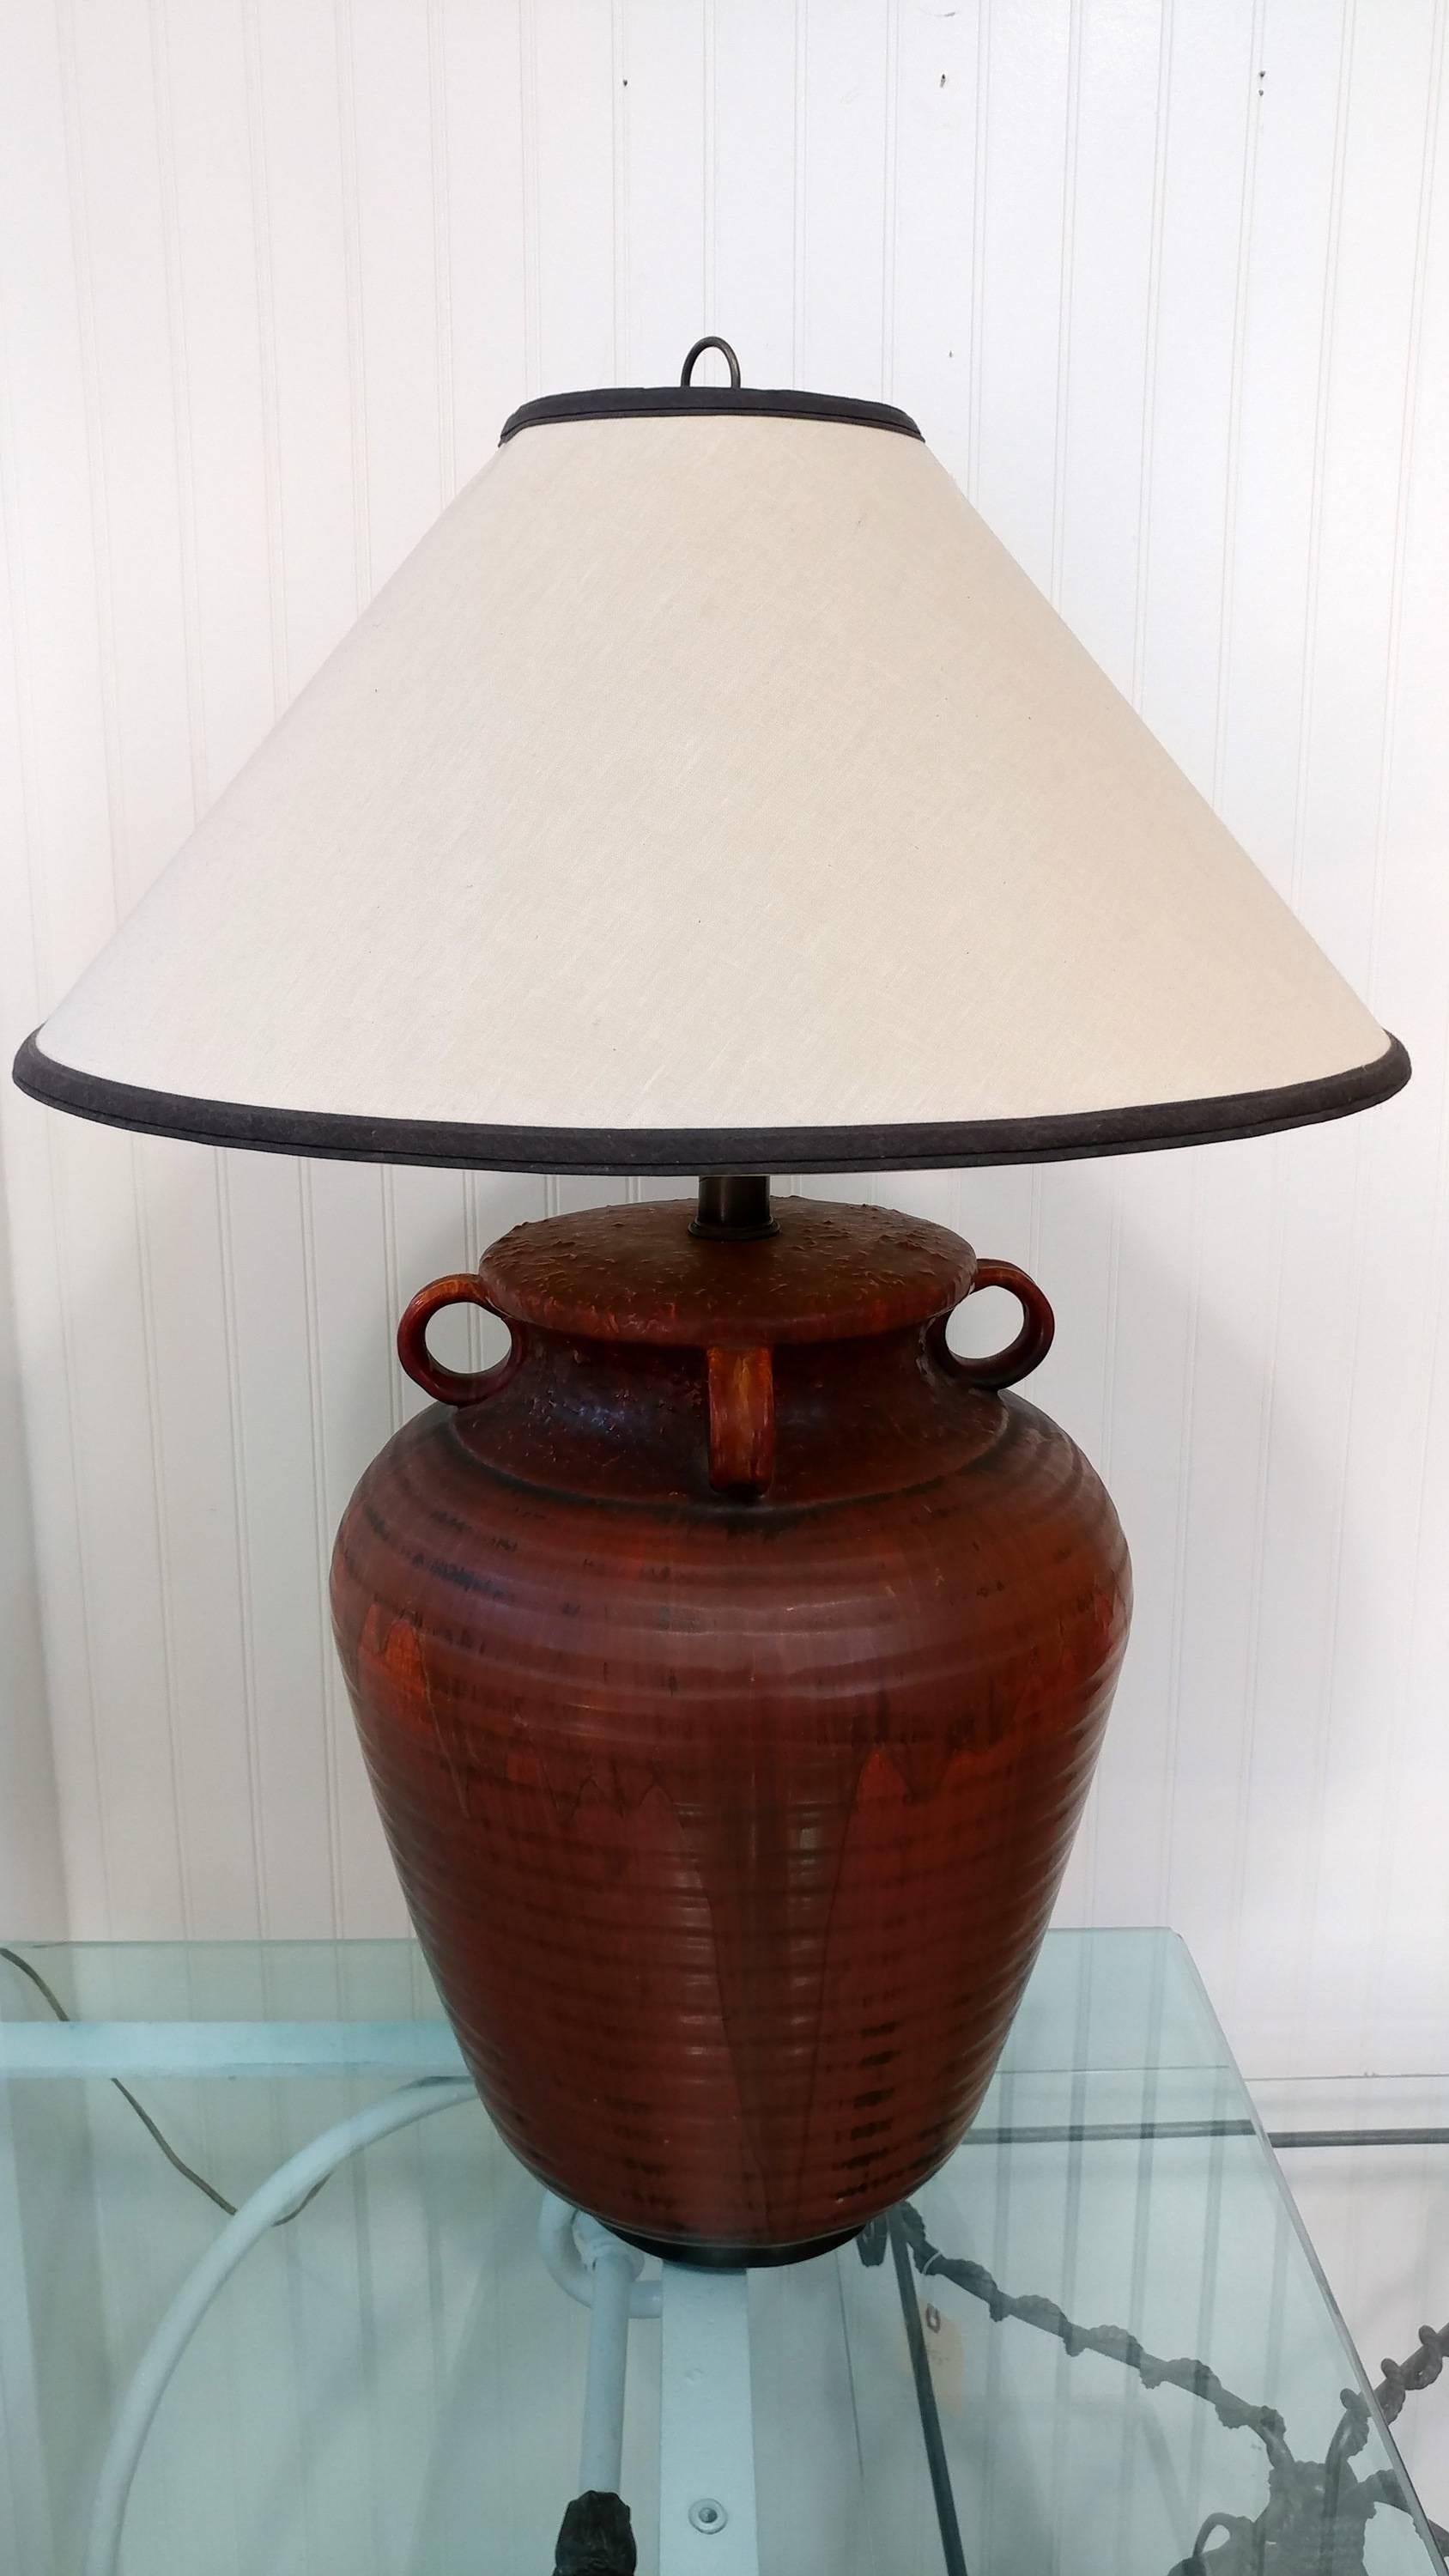 Very early and enormous skill hand thrown stoneware in an ovoid jar form table lamp by Nardini Studios. Beautiful earthy clay red matted drip glazed over incised body, 4 vertical handles. Circa 1950s, a fine and rare example of Nardini Studios